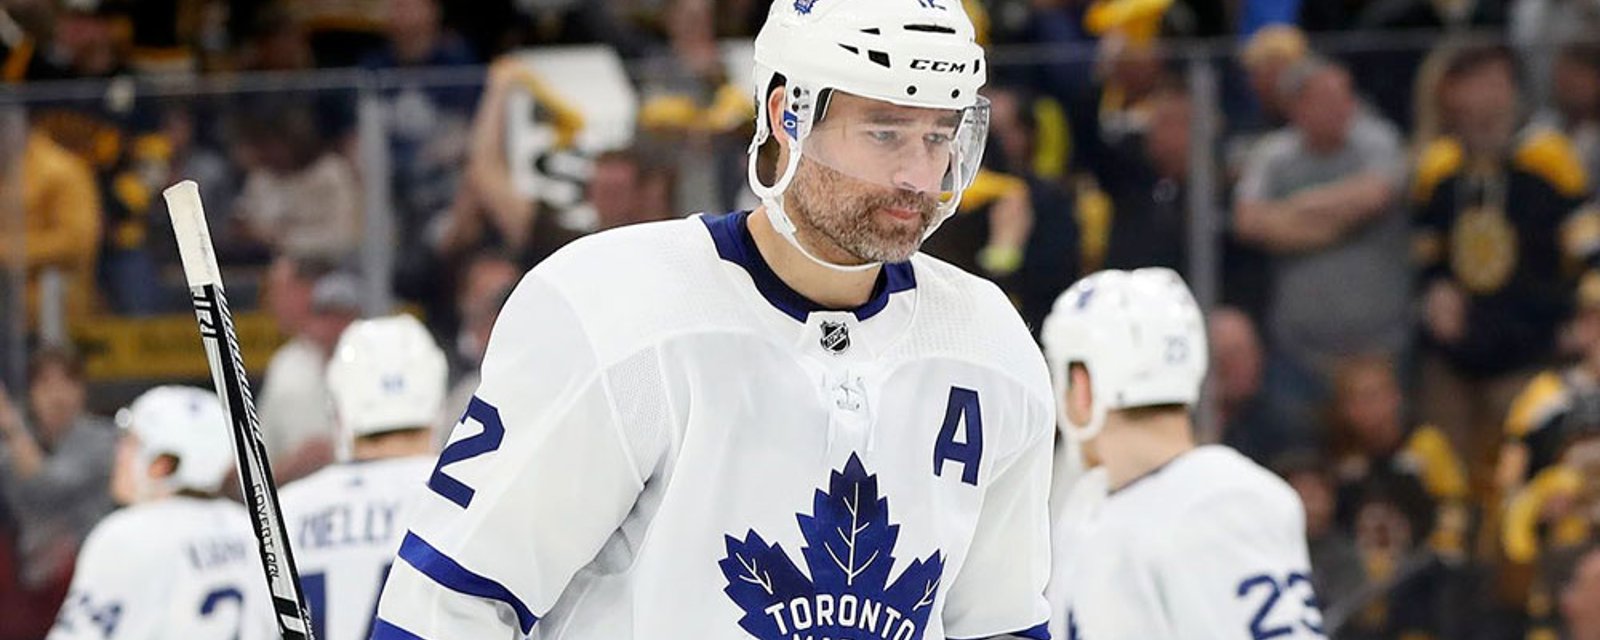 Report: Canadian team shows interest in signing Patrick Marleau